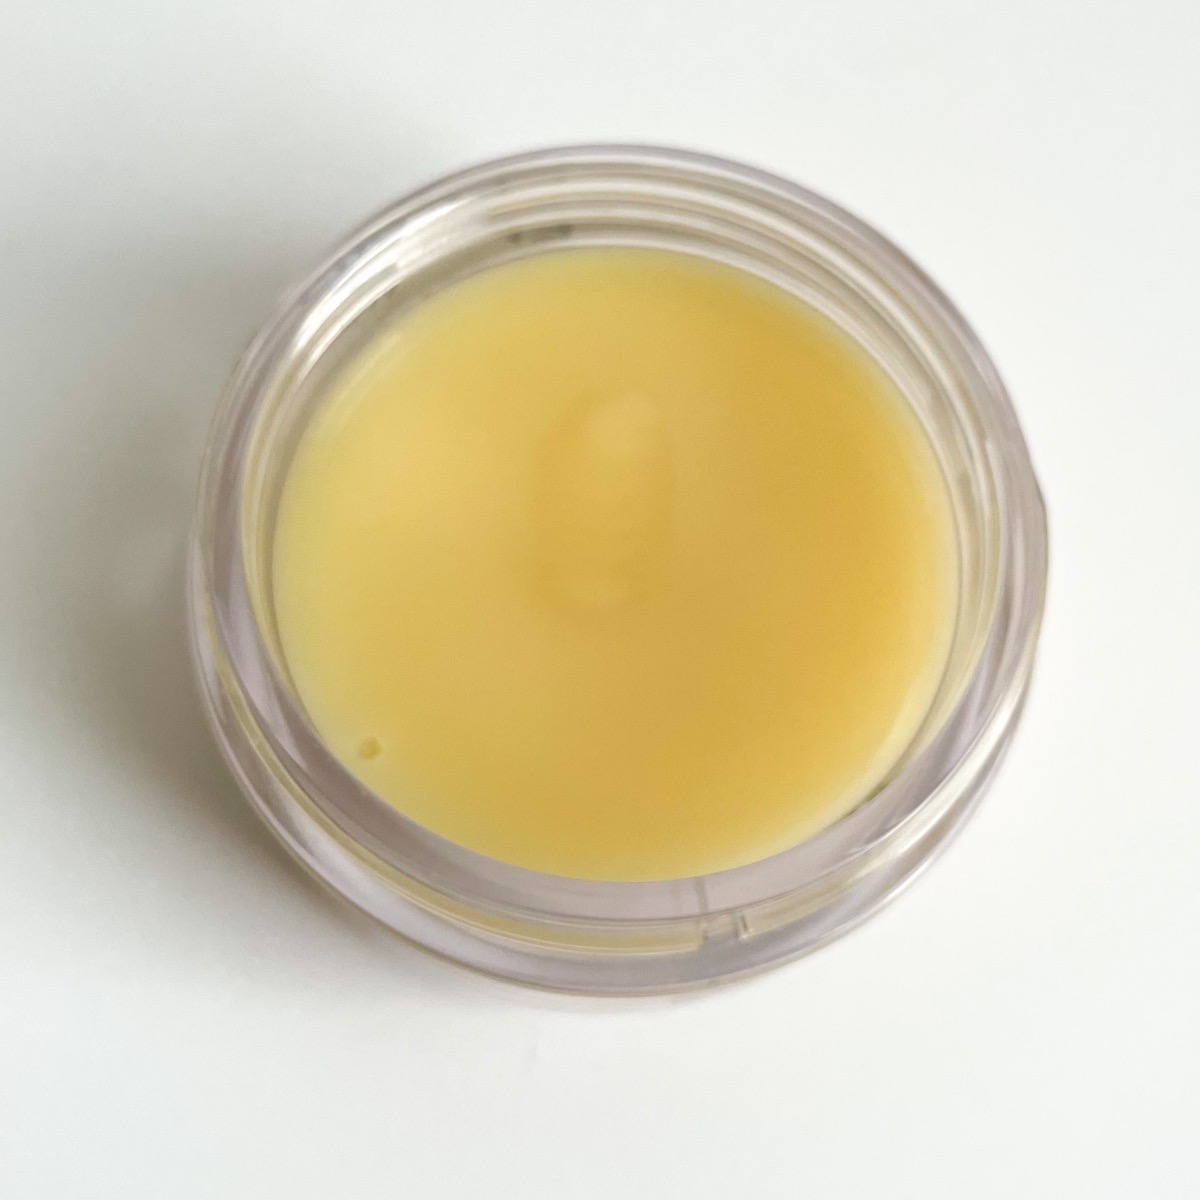 opened jar showing yellow balm texture